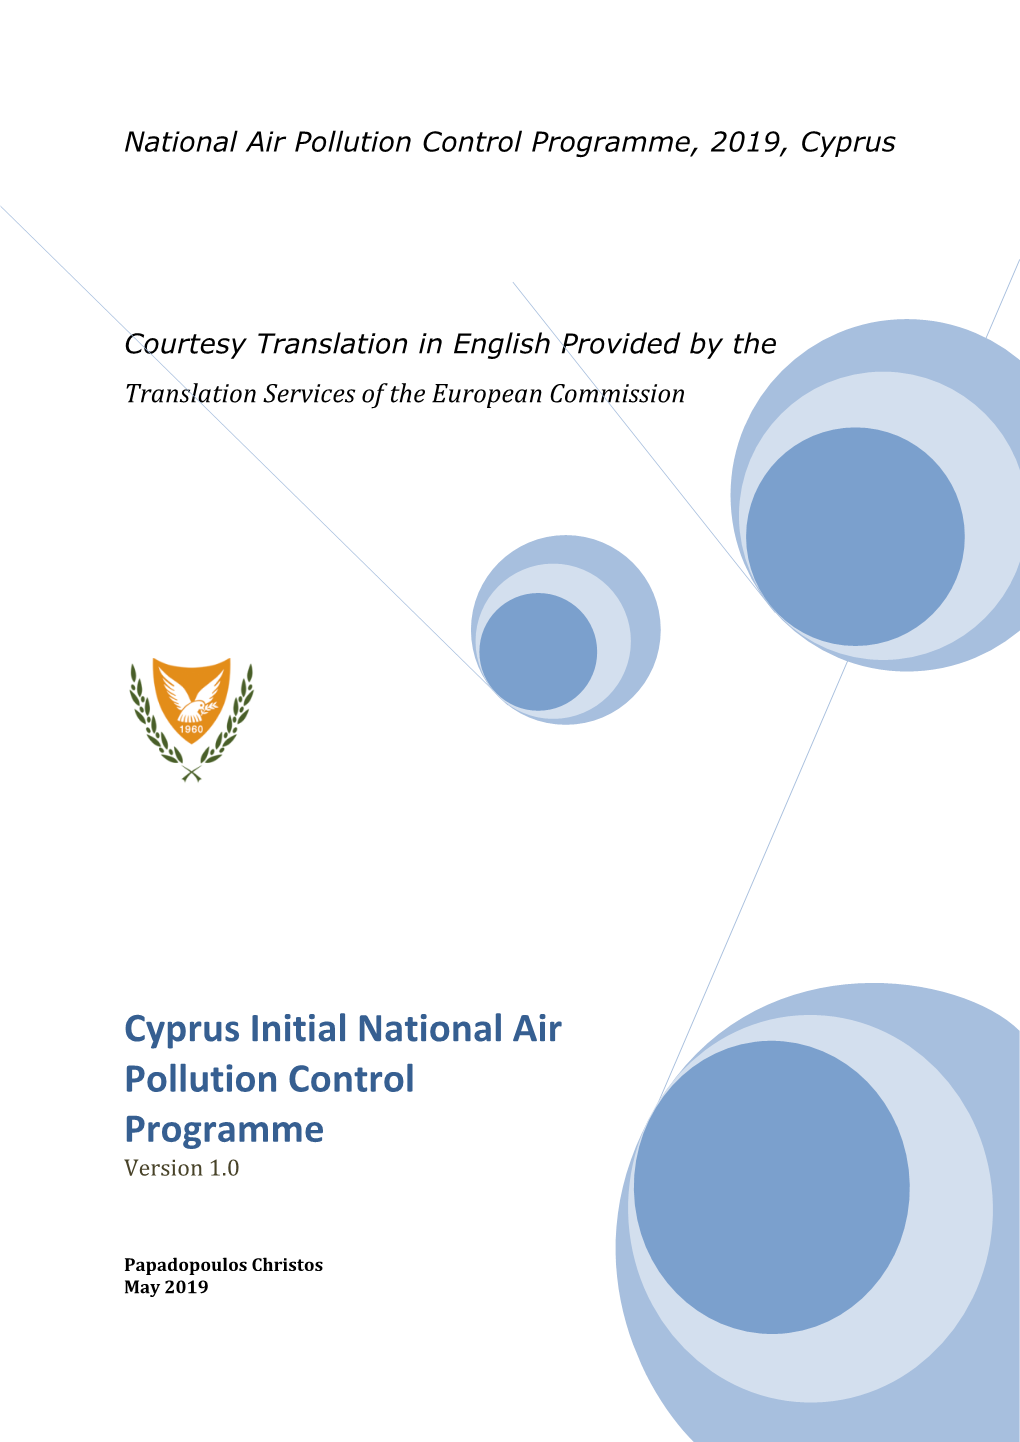 Cyprus Initial National Air Pollution Control Programme Version 1.0